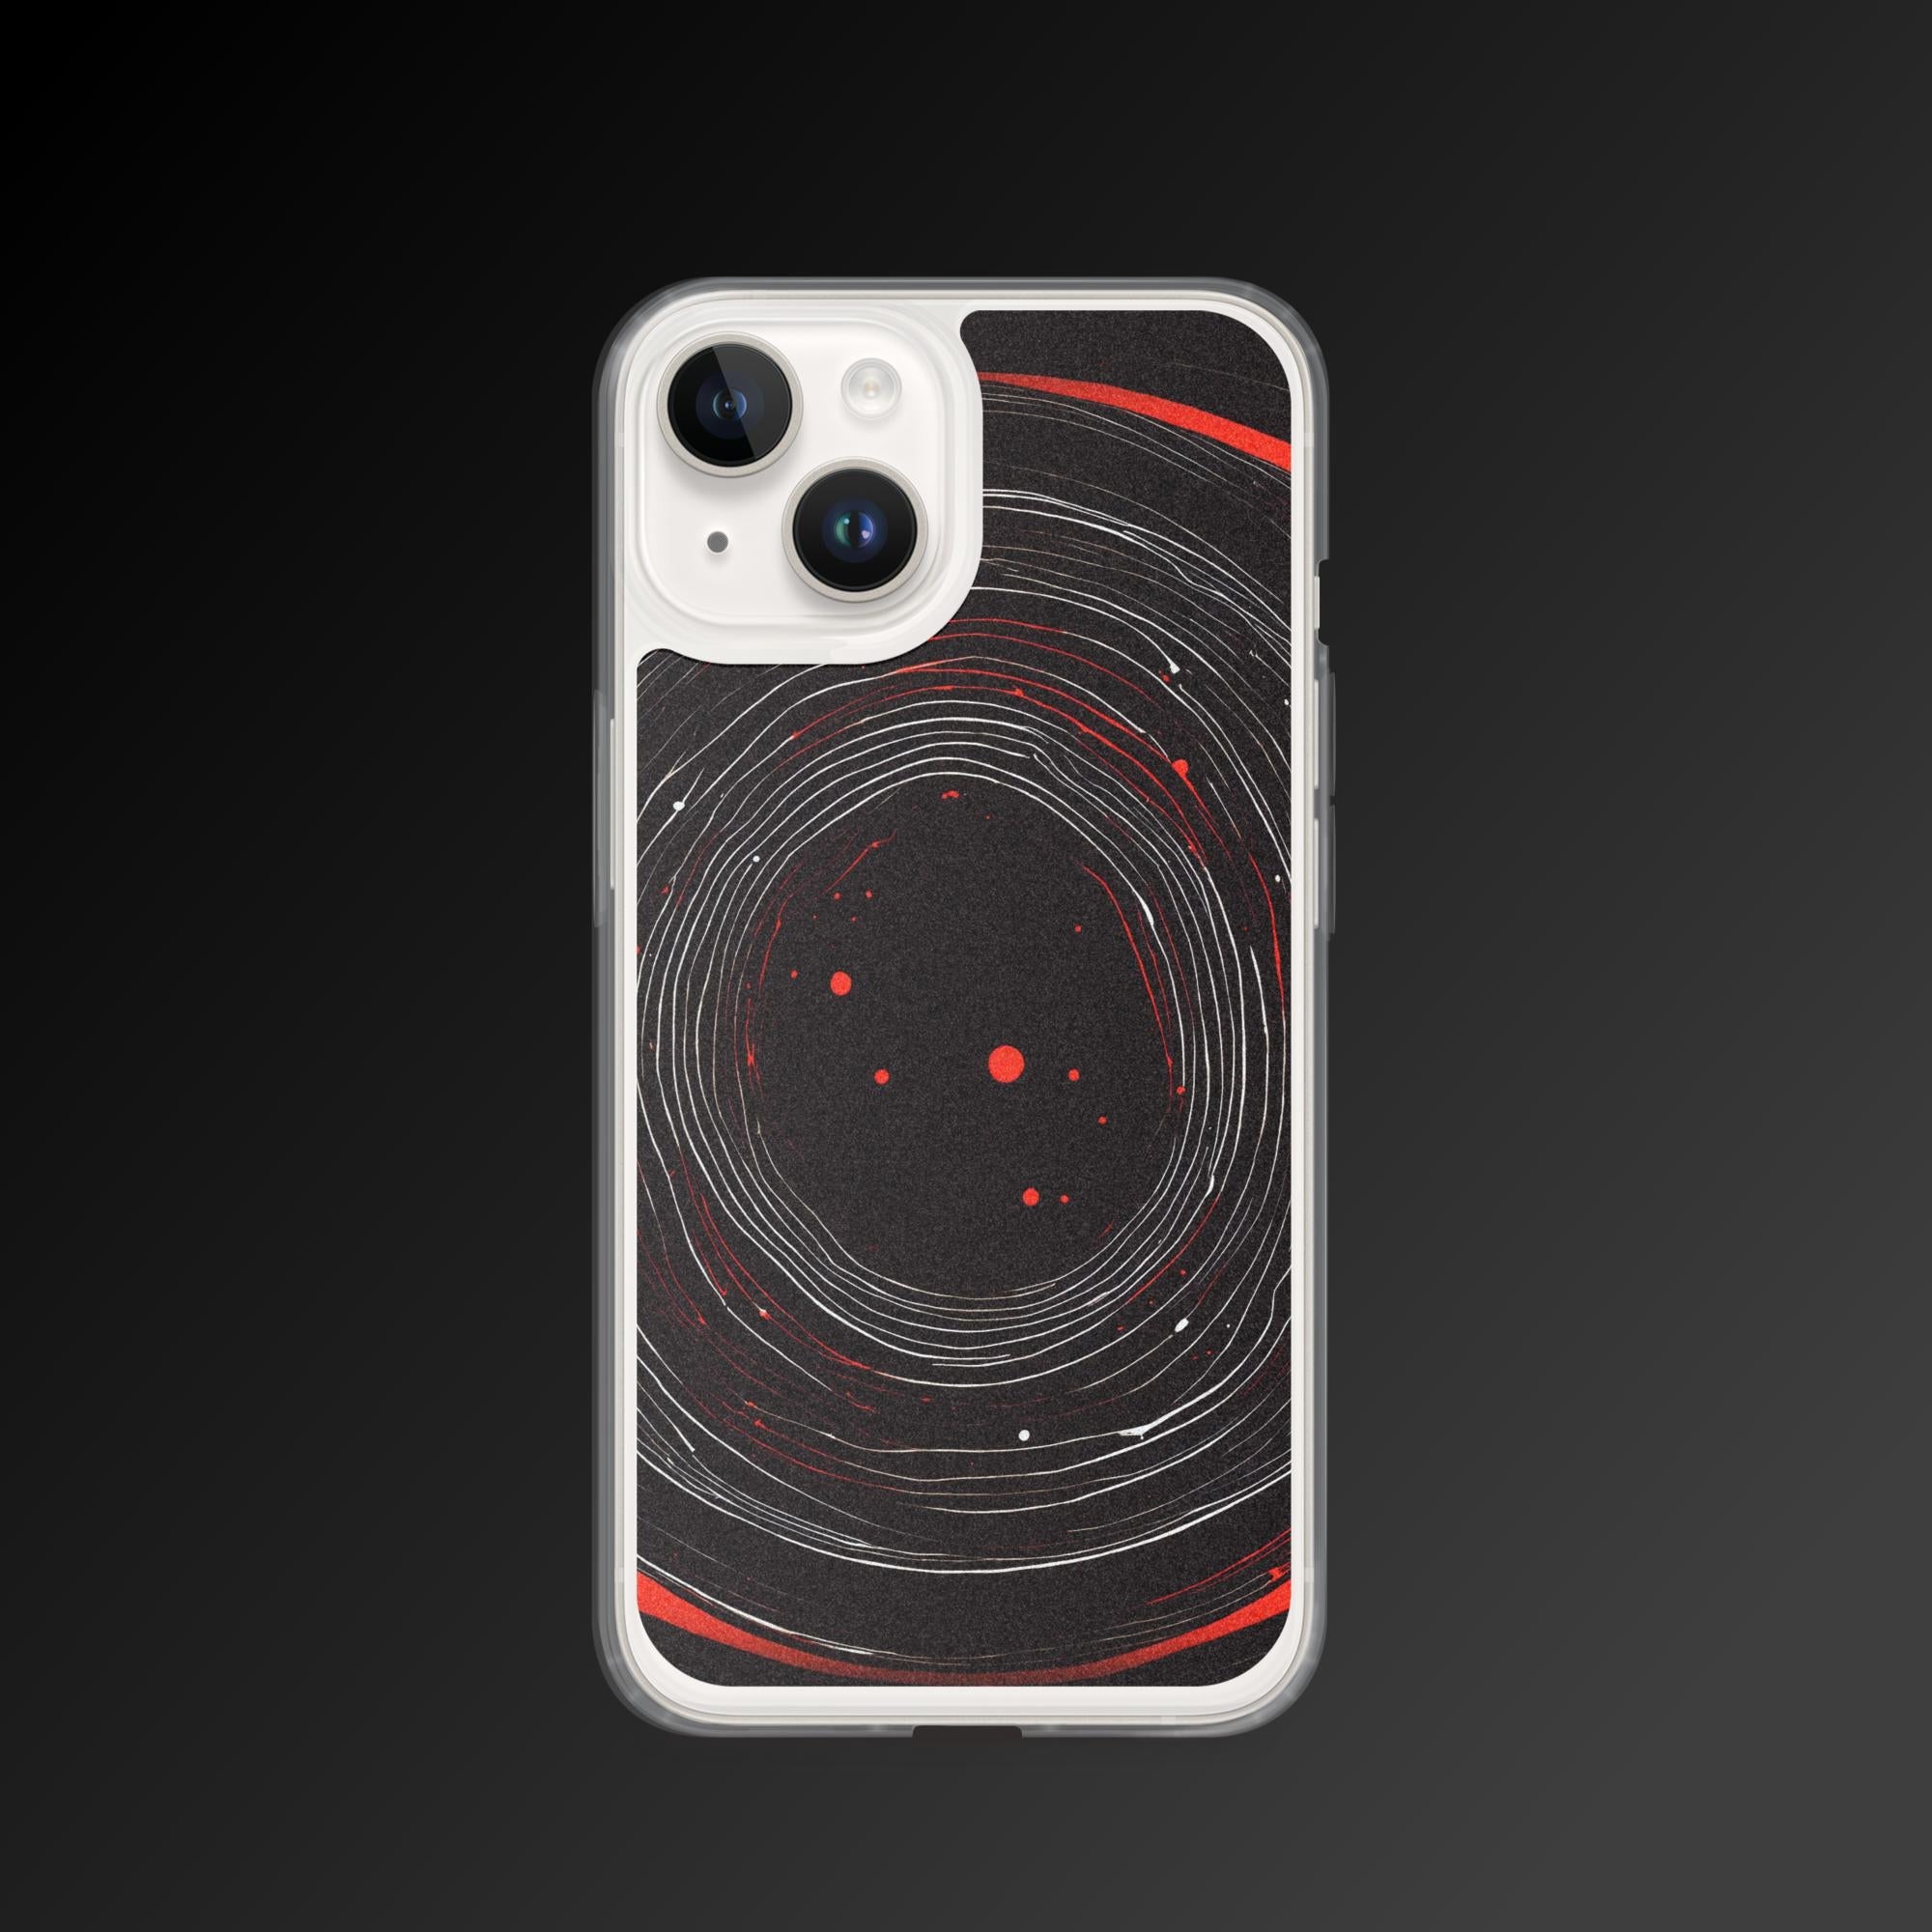 "Gory black hole" clear iphone case - Clear iphone case - Ever colorful